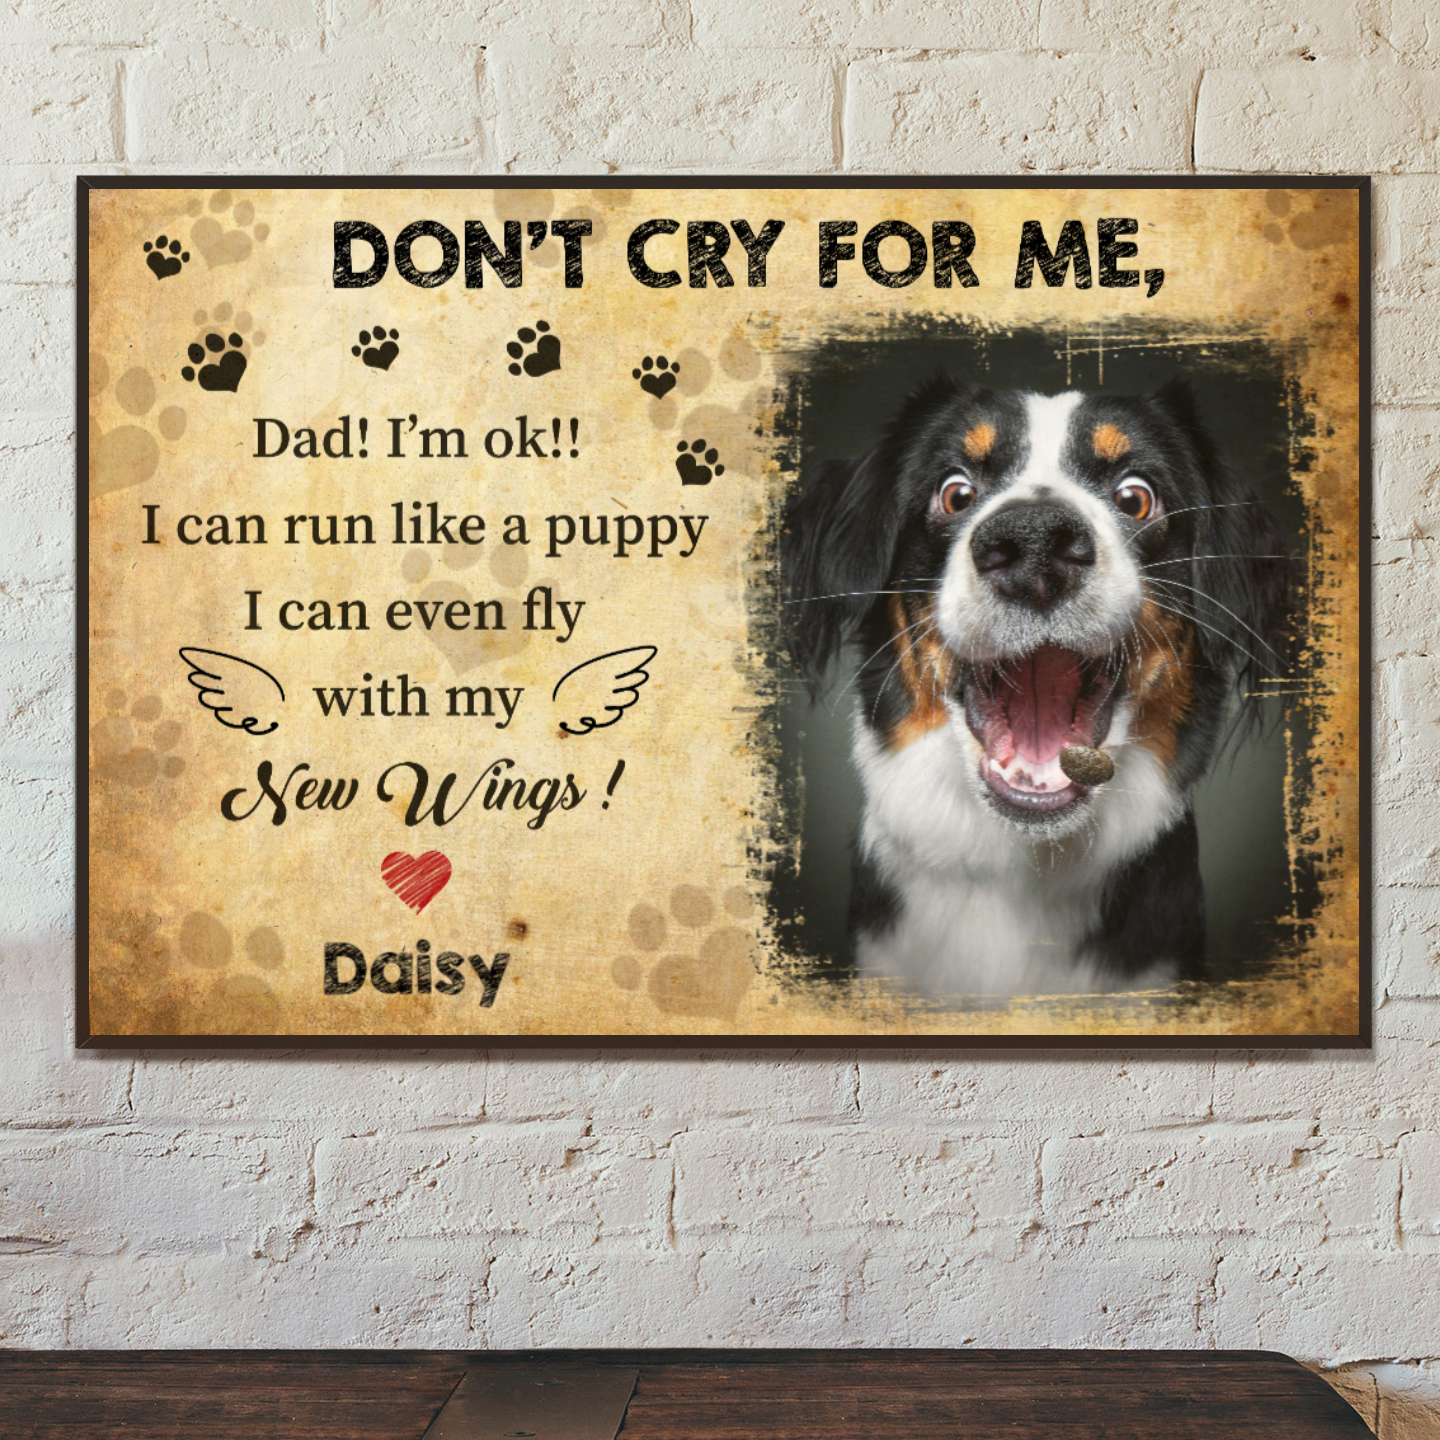 Ciaocustom Poster/Framed Canvas/Unframed Canvas, Custom Dog Image/Name/Background/Text, Gifts For Dog Lovers, Don't cry for me. Dad I'm ok